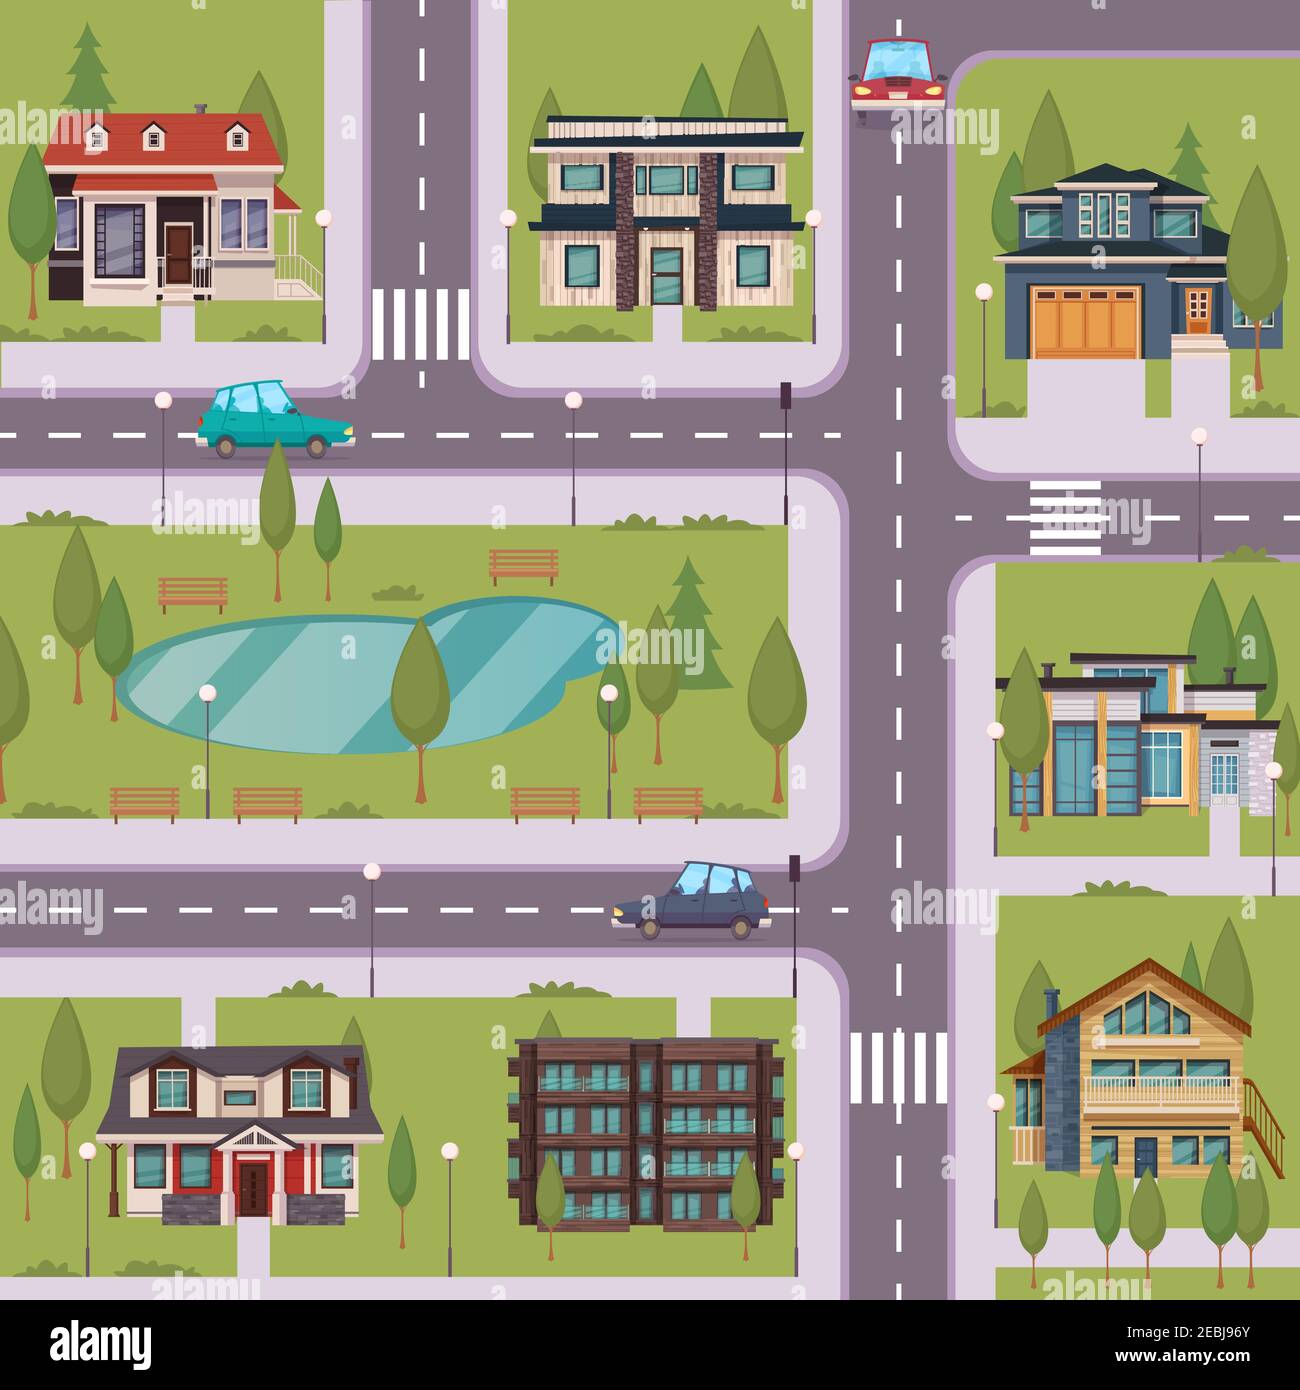 Countryside flat template with suburban residential houses cottages estates trees grass lake road cars vector illustration Stock Vector